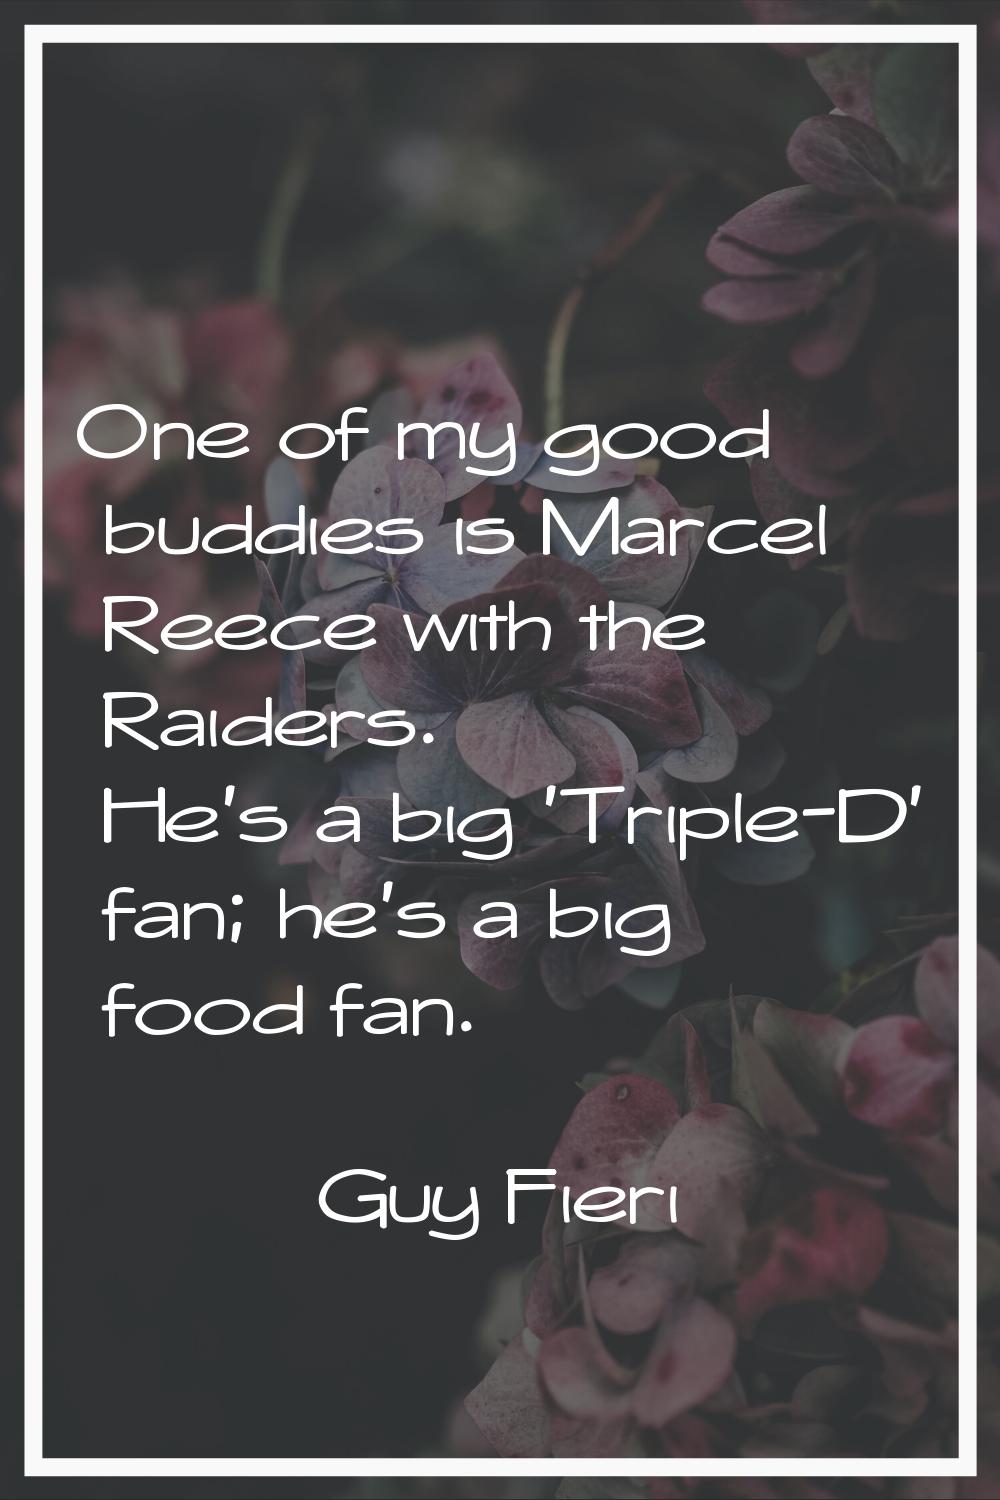 One of my good buddies is Marcel Reece with the Raiders. He's a big 'Triple-D' fan; he's a big food